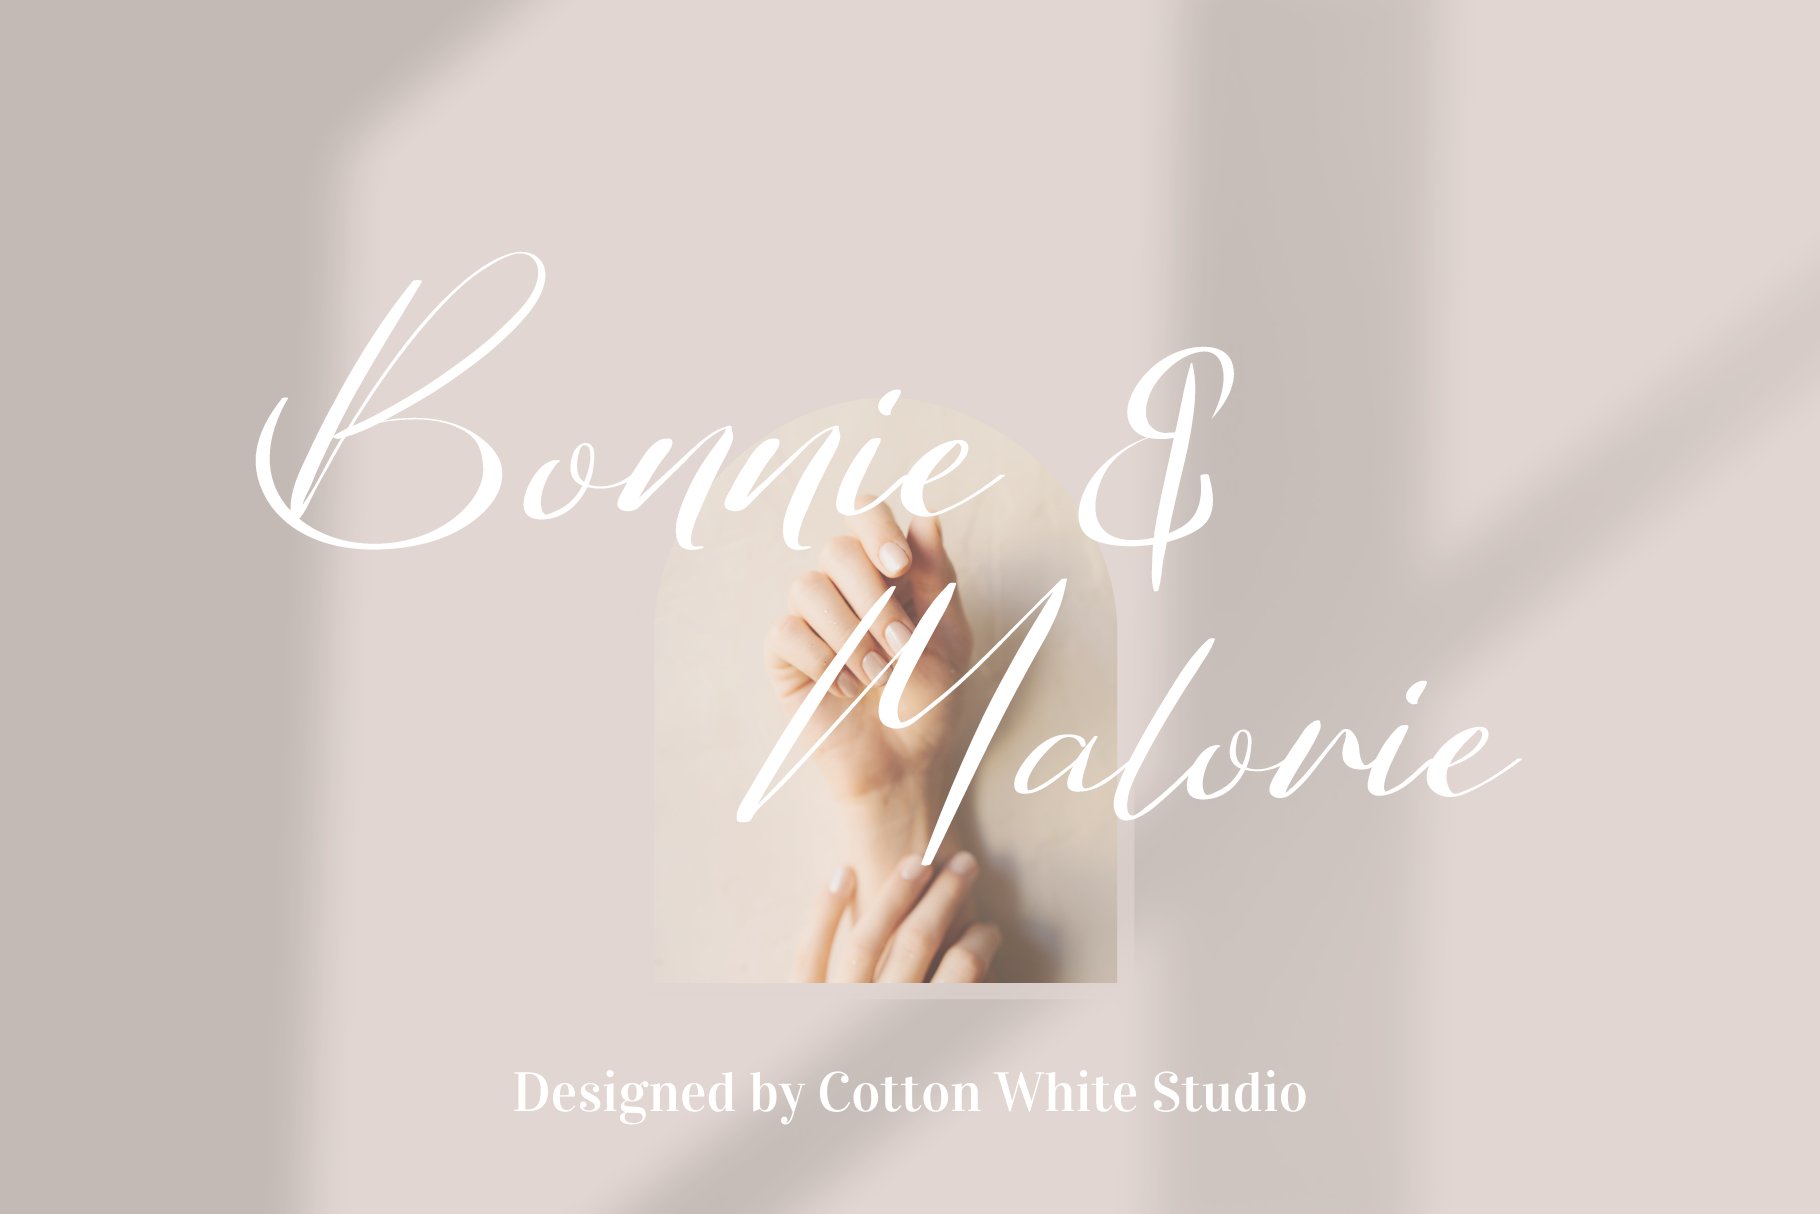 Bonnie & Malorie Handwriting Font cover image.